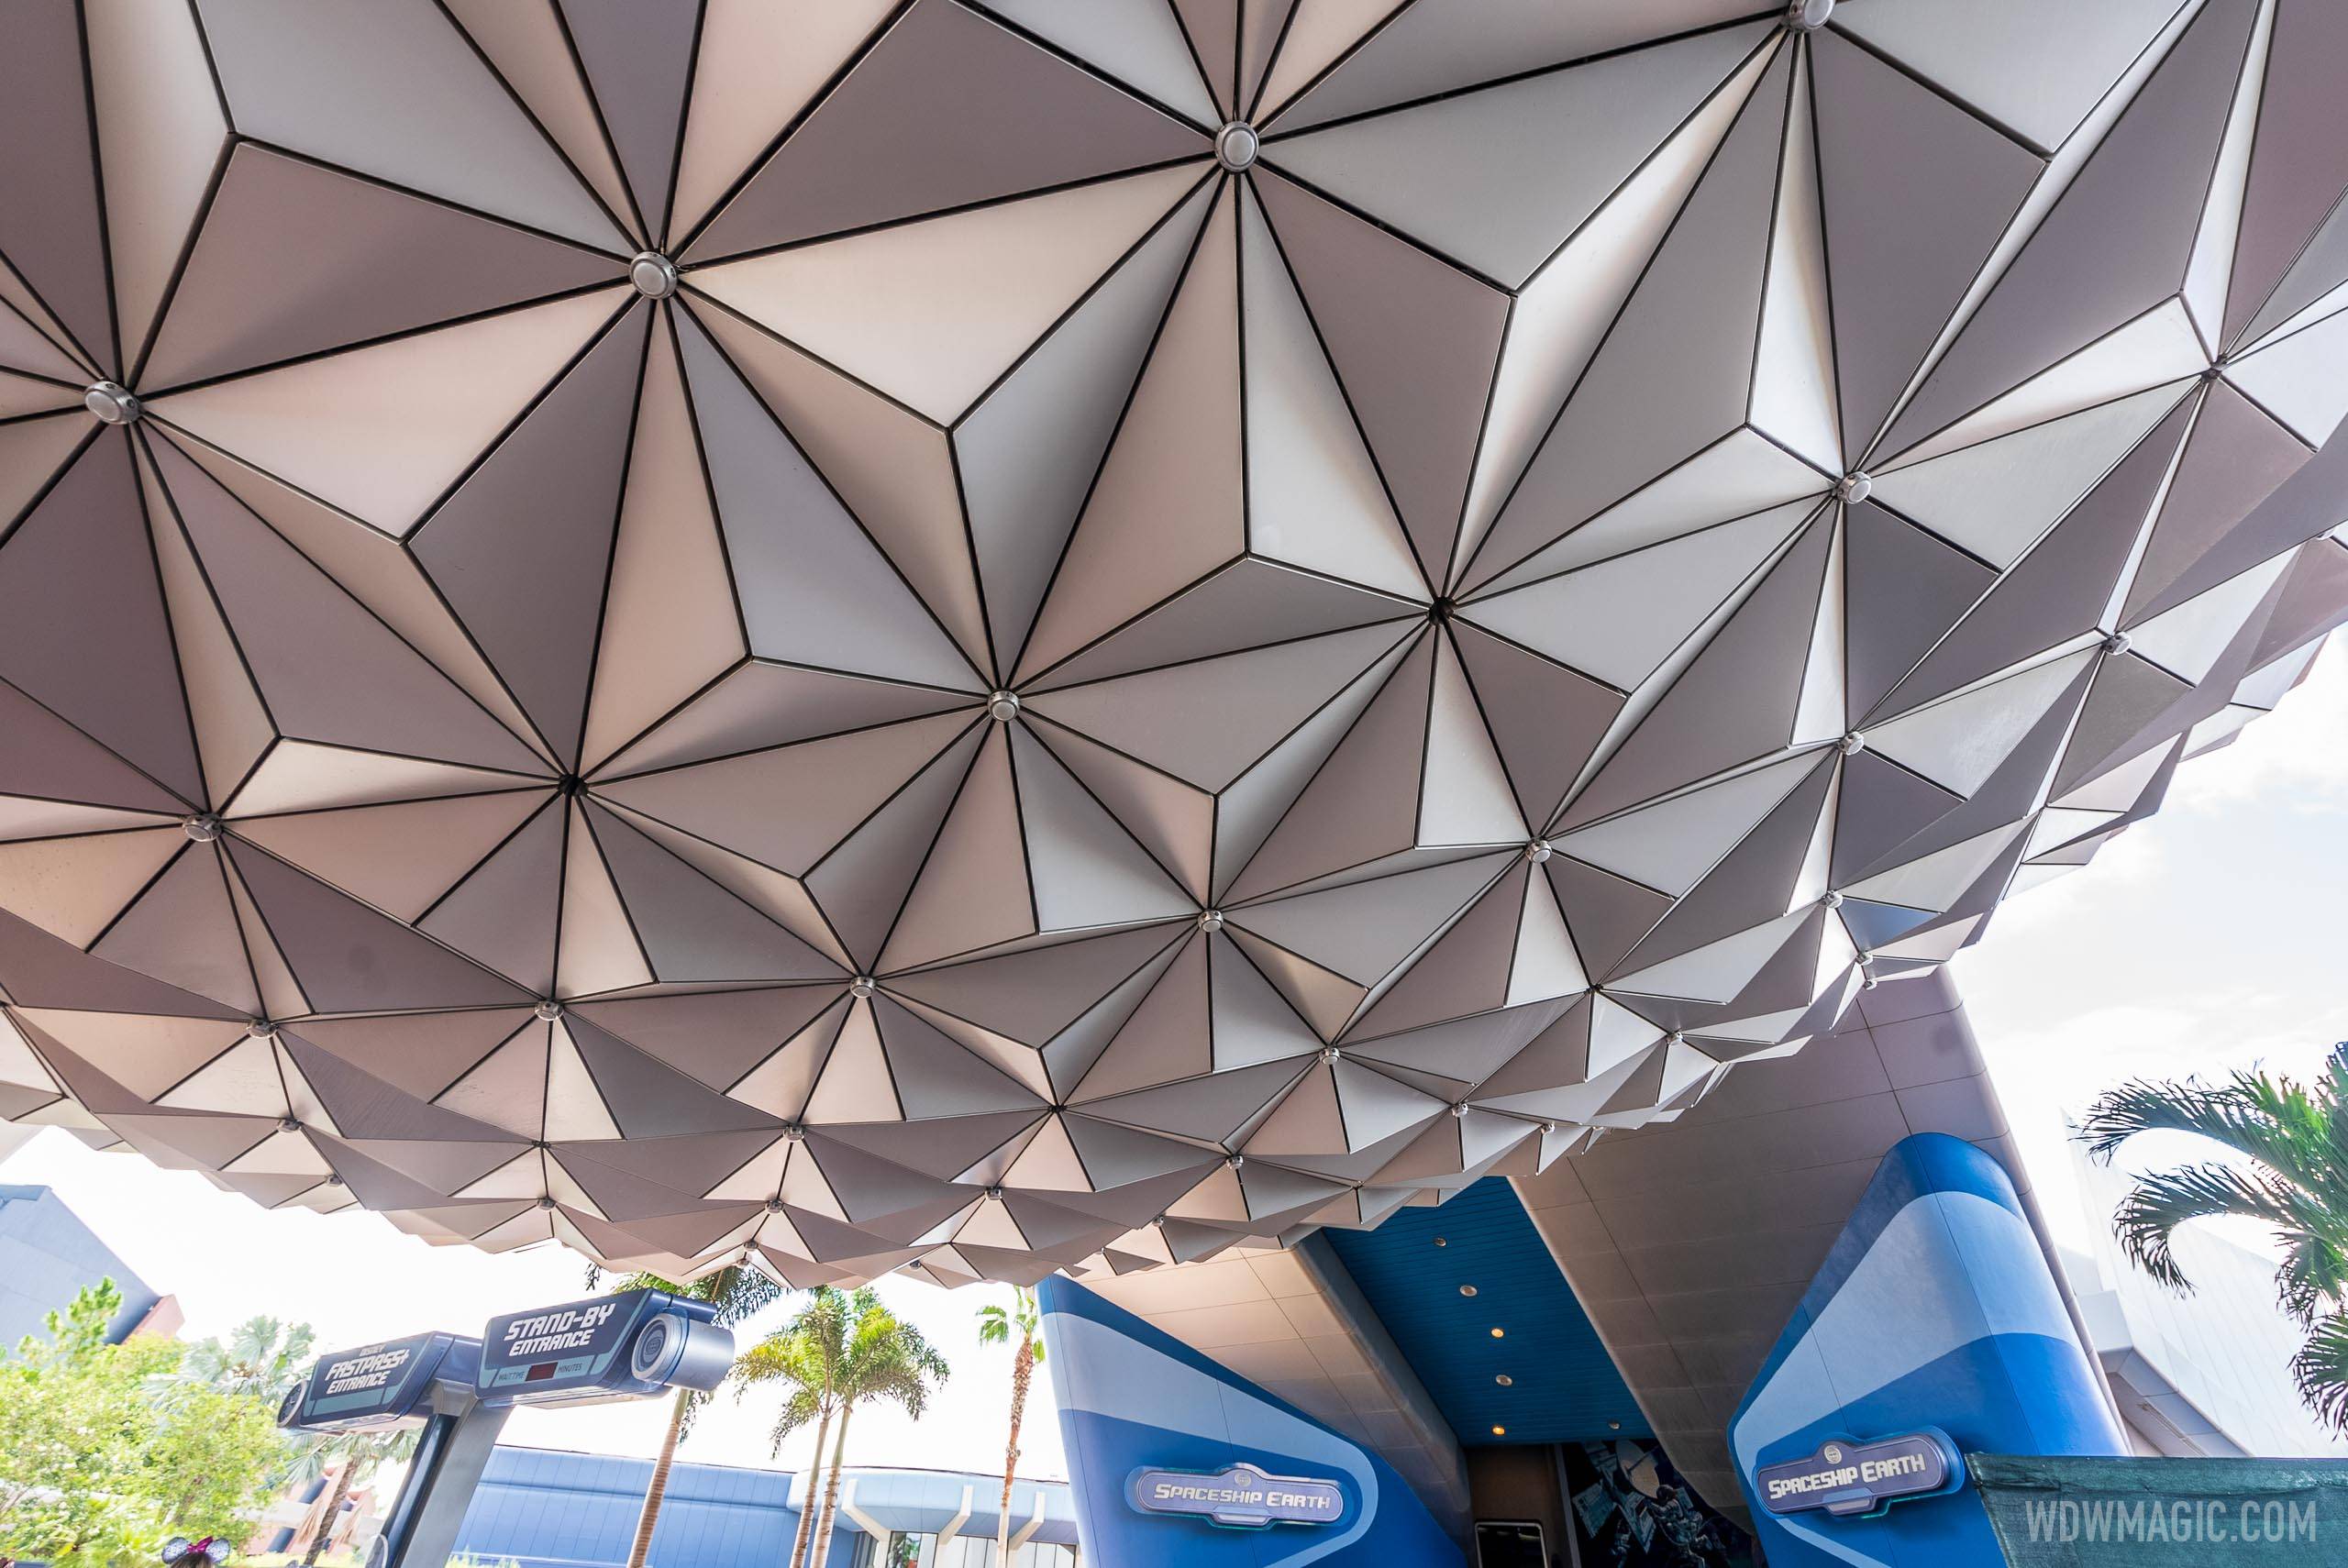 Spaceship Earth point of lights on the underside - June 9 2021